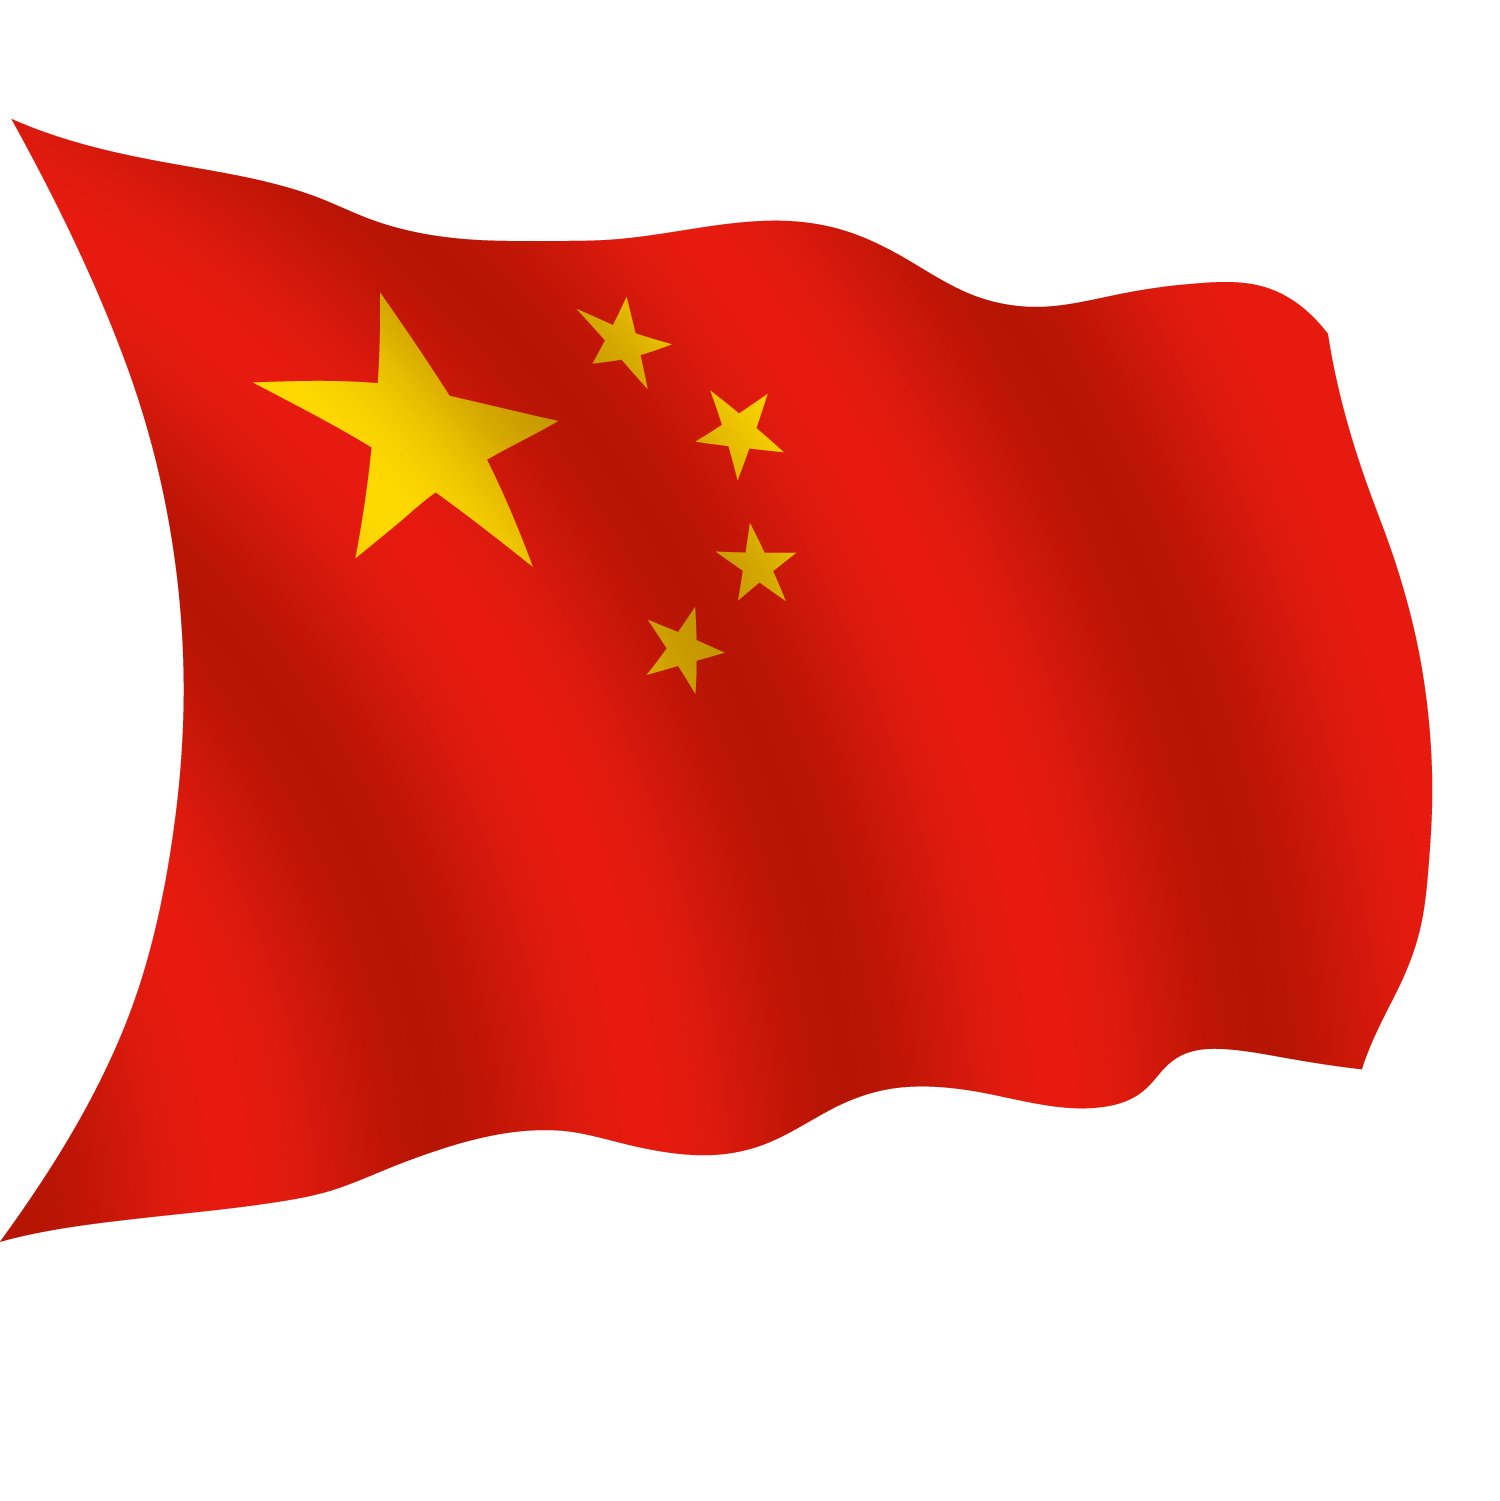 Flag of China Clip art - Chinese flag png download - 1500*1501 - Free